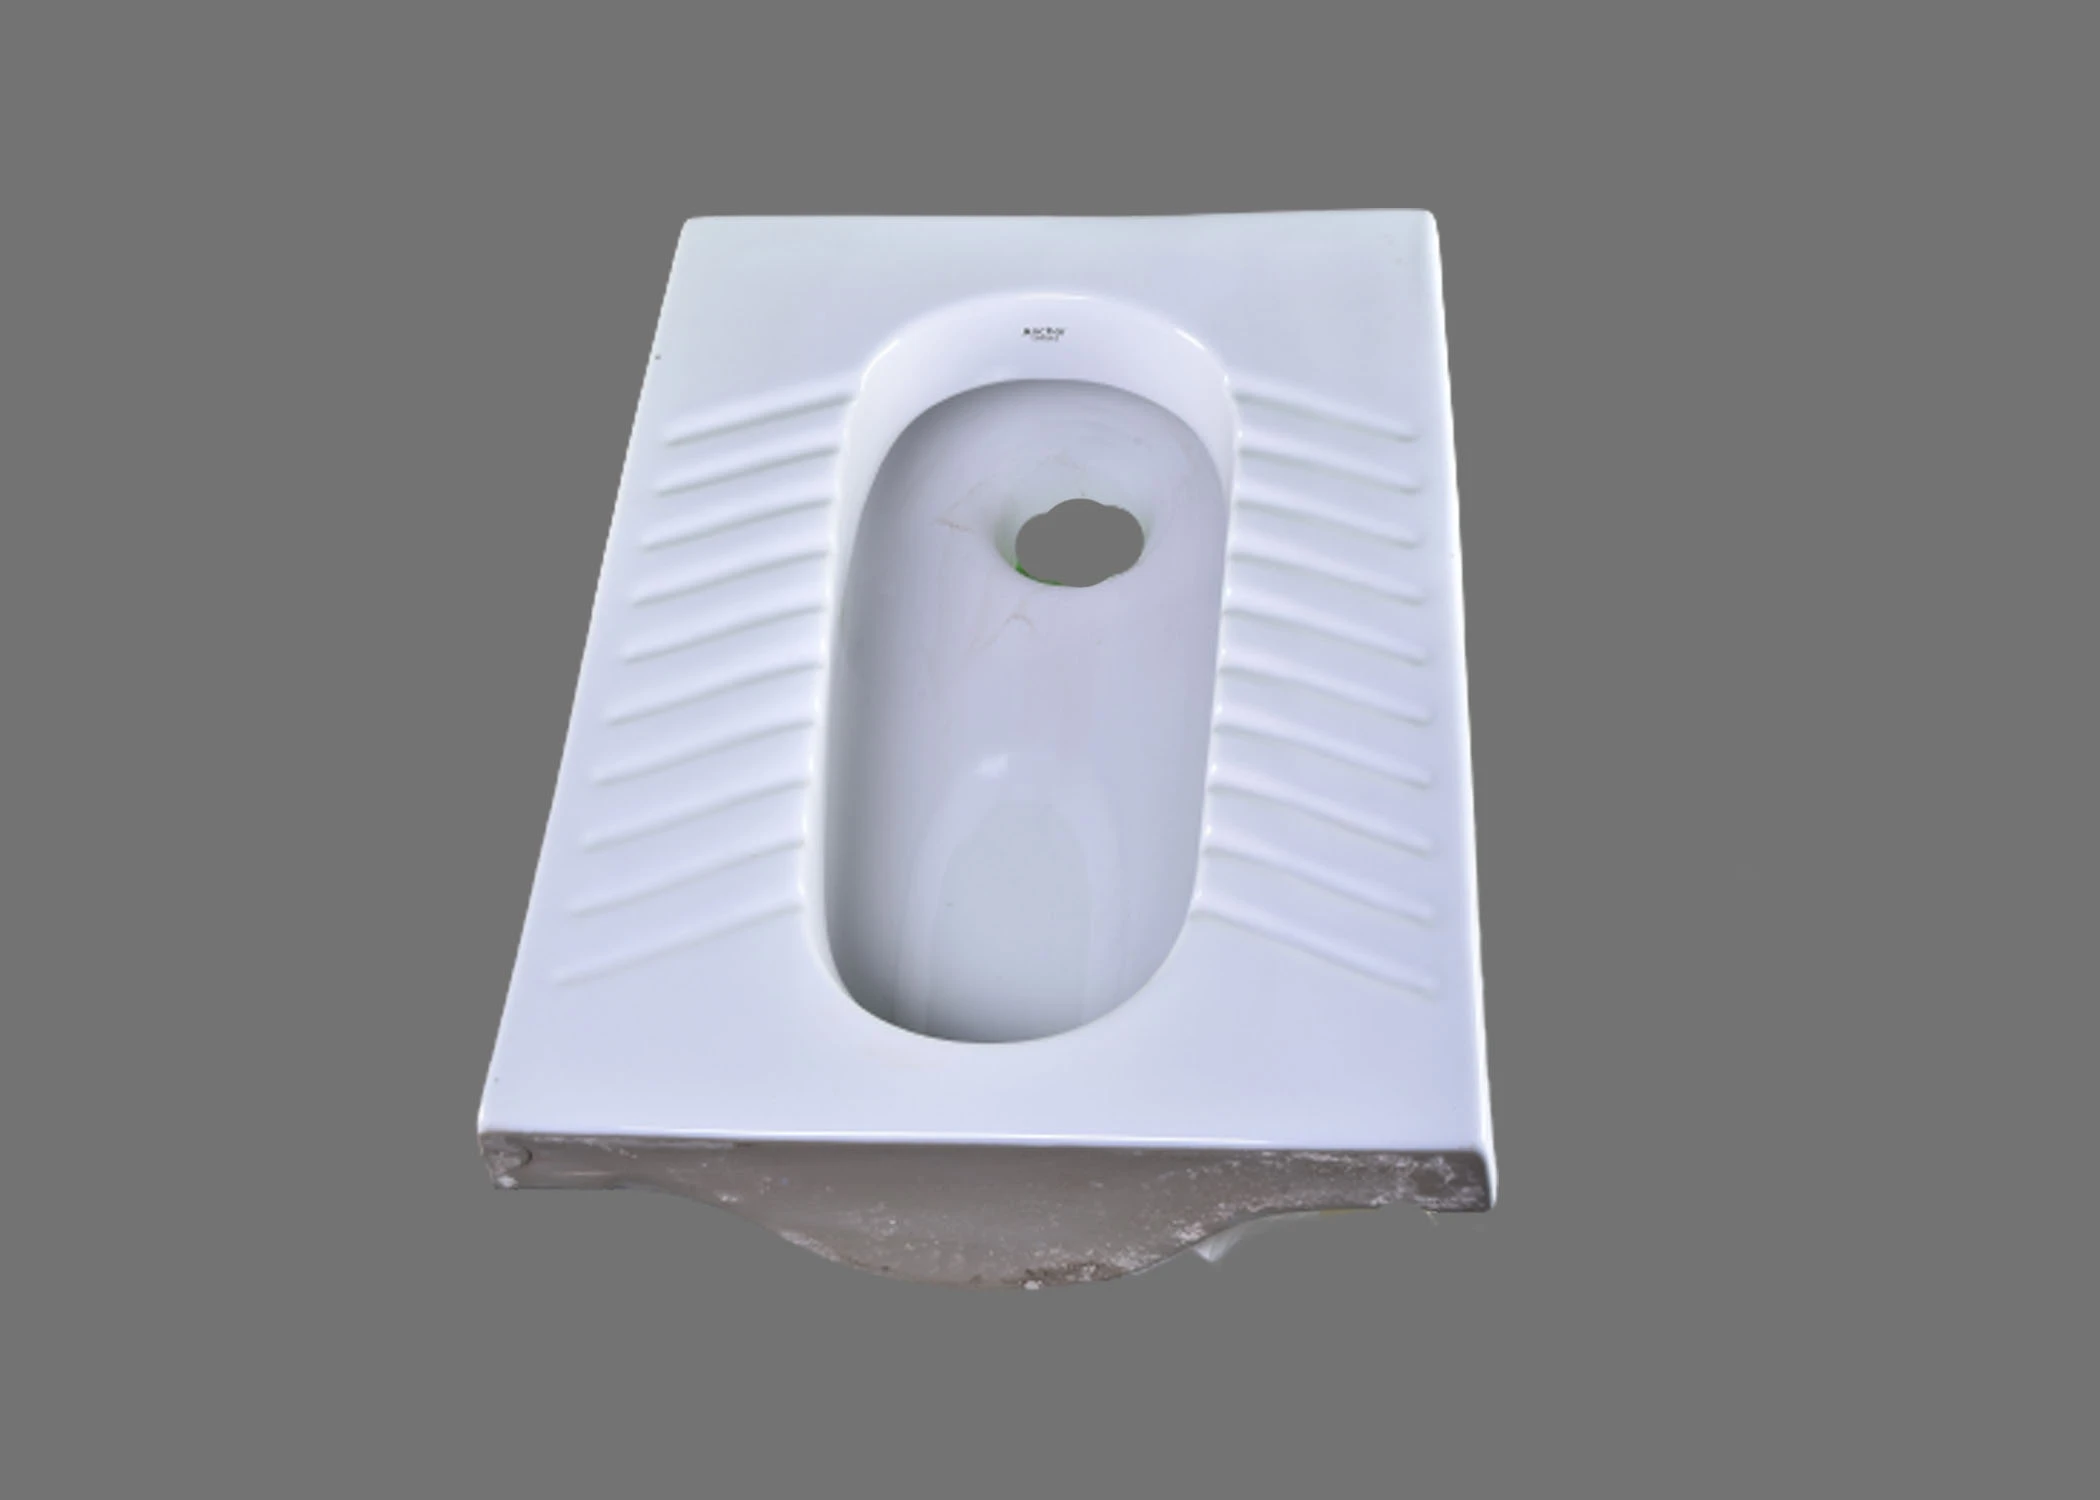 high QUALITY Wc Orrissa Squatting Pan  Water Closet Sanitaryware Toilet with Trapway 5 Years Modern Hotel N/A Toilet Seat 8030